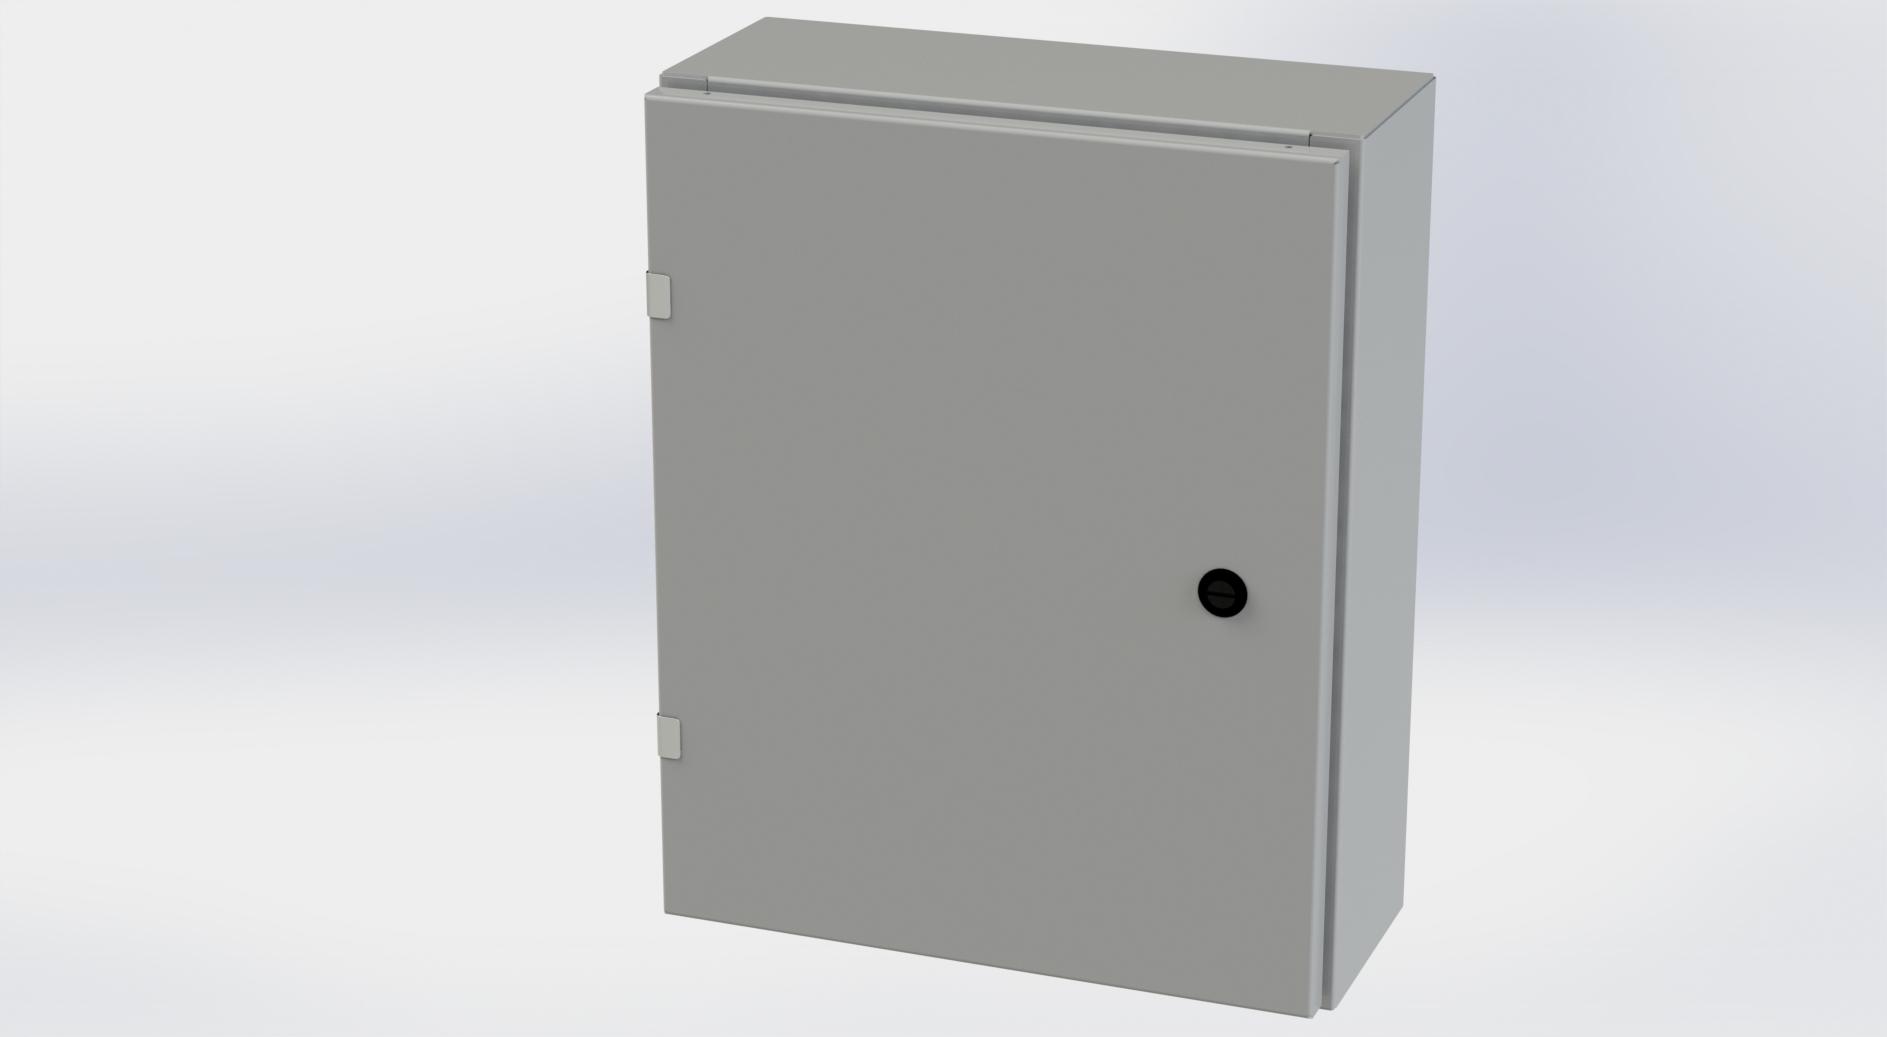 Saginaw Control SCE-20EL1606LP EL Enclosure, Height:20.00", Width:16.00", Depth:6.00", ANSI-61 gray powder coating inside and out. Optional sub-panels are powder coated white.